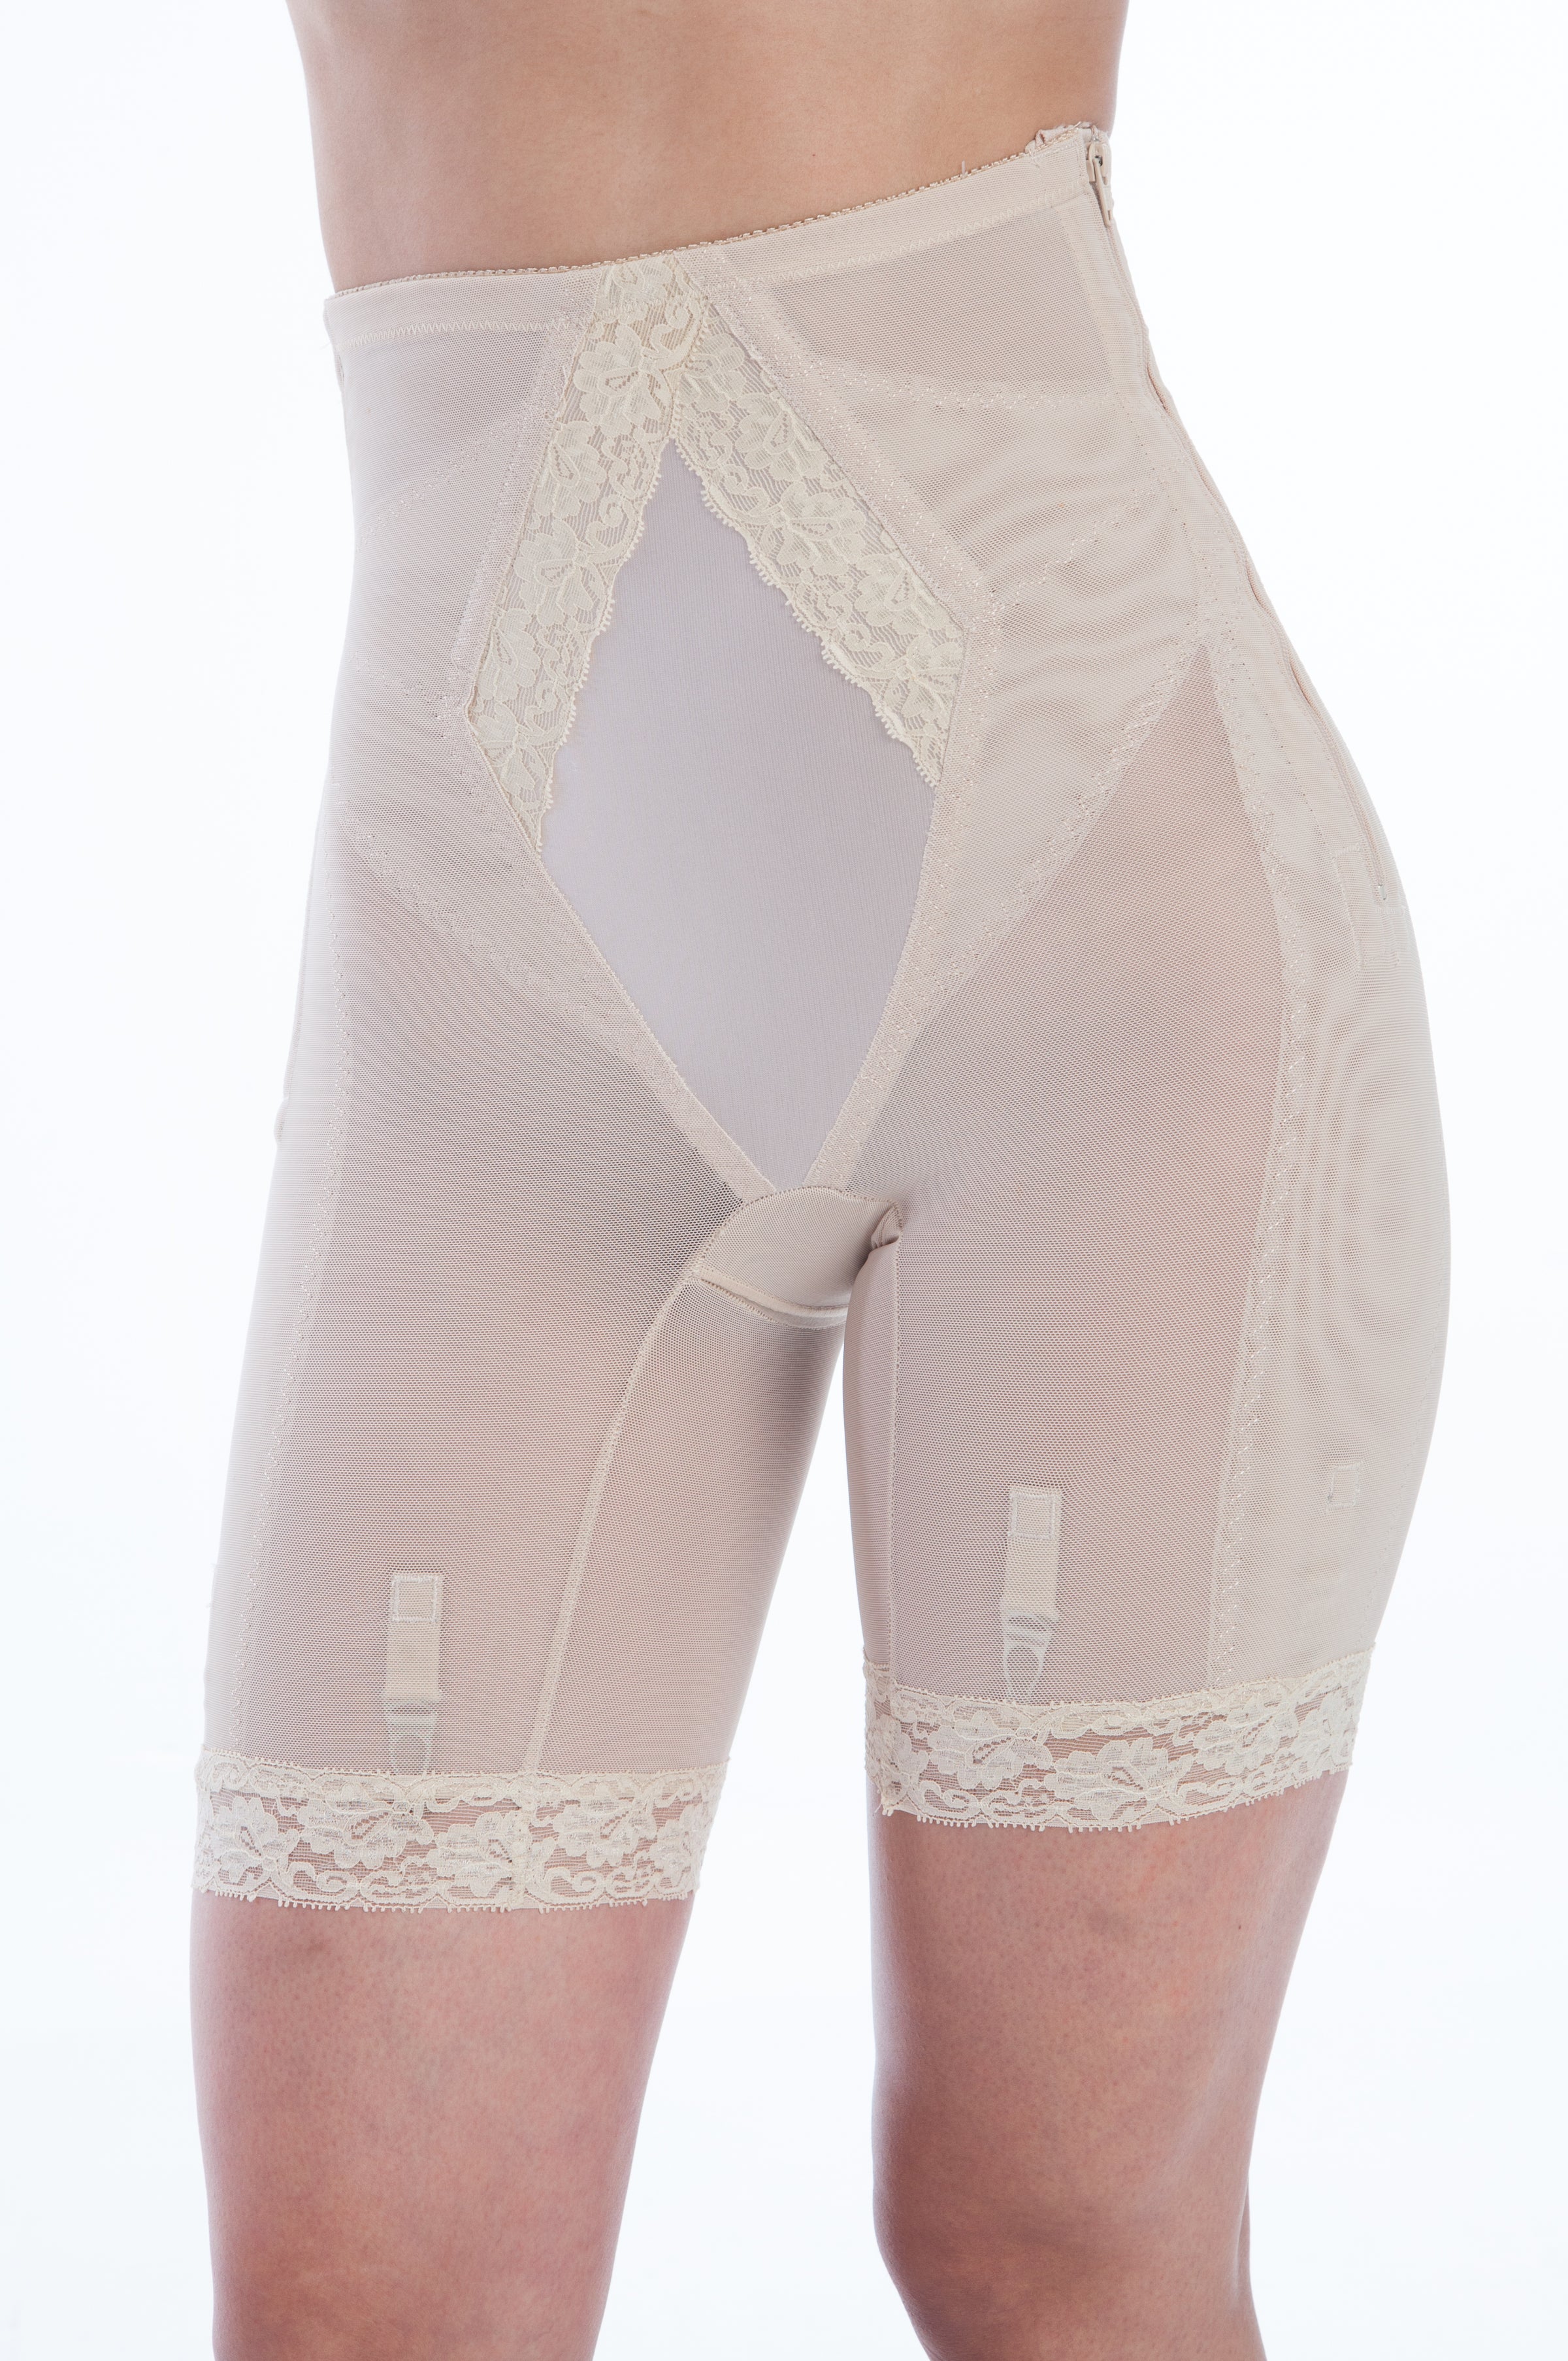 299 - Custom Maid Women`s Extra Support Long Leg Girdle With Side Zipper